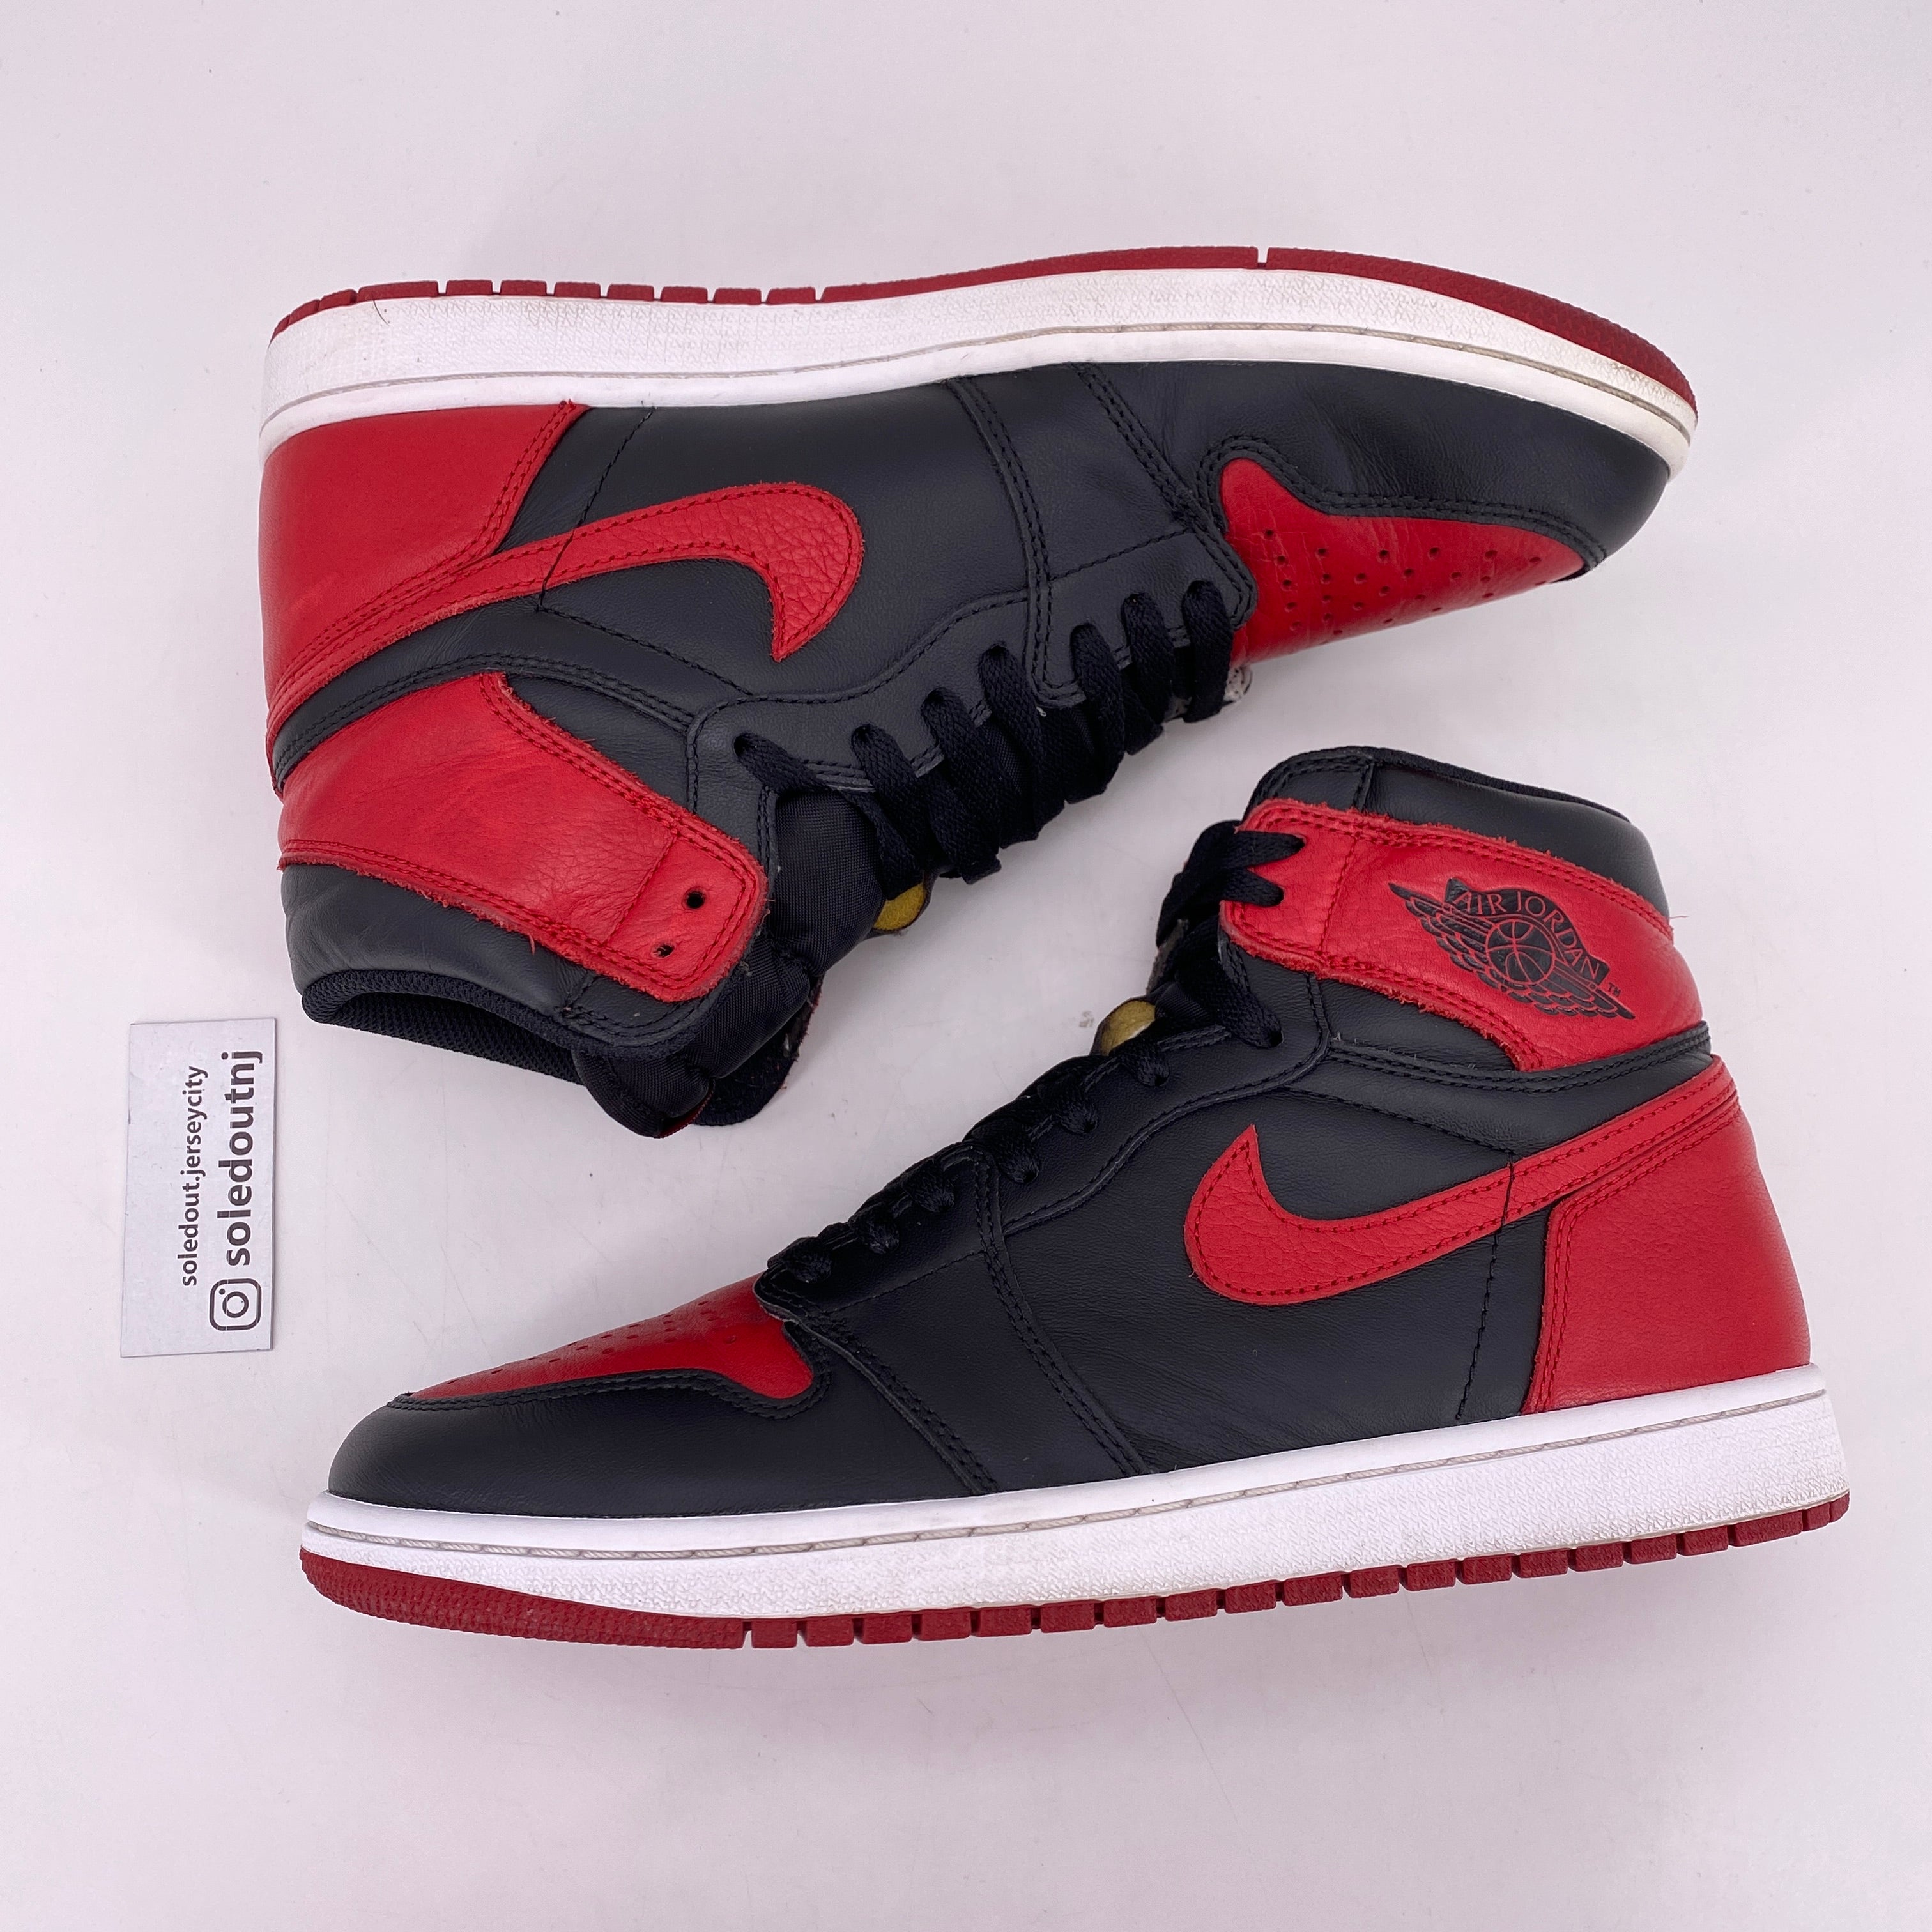 Air Jordan 1 Retro High OG &quot;BANNED&quot; 2016 Used Size 10.5